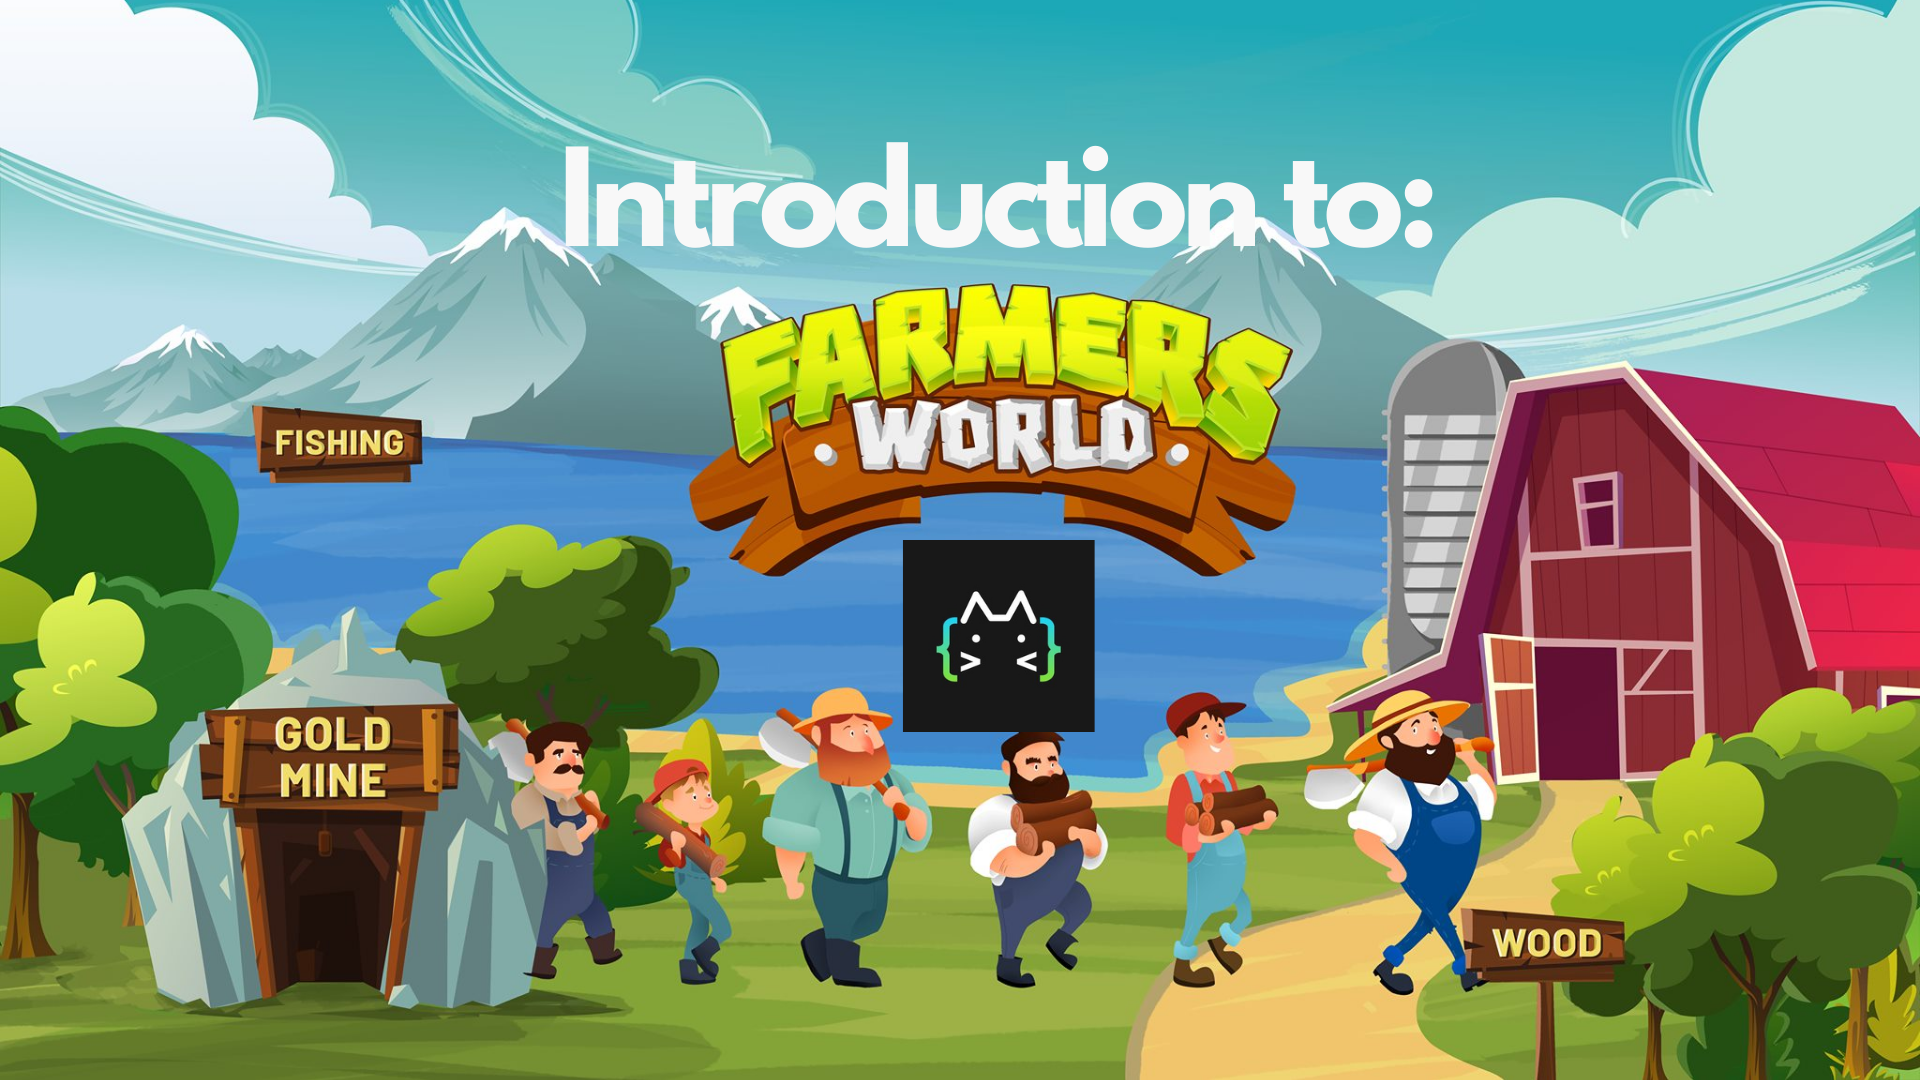 Introduction to farmers world